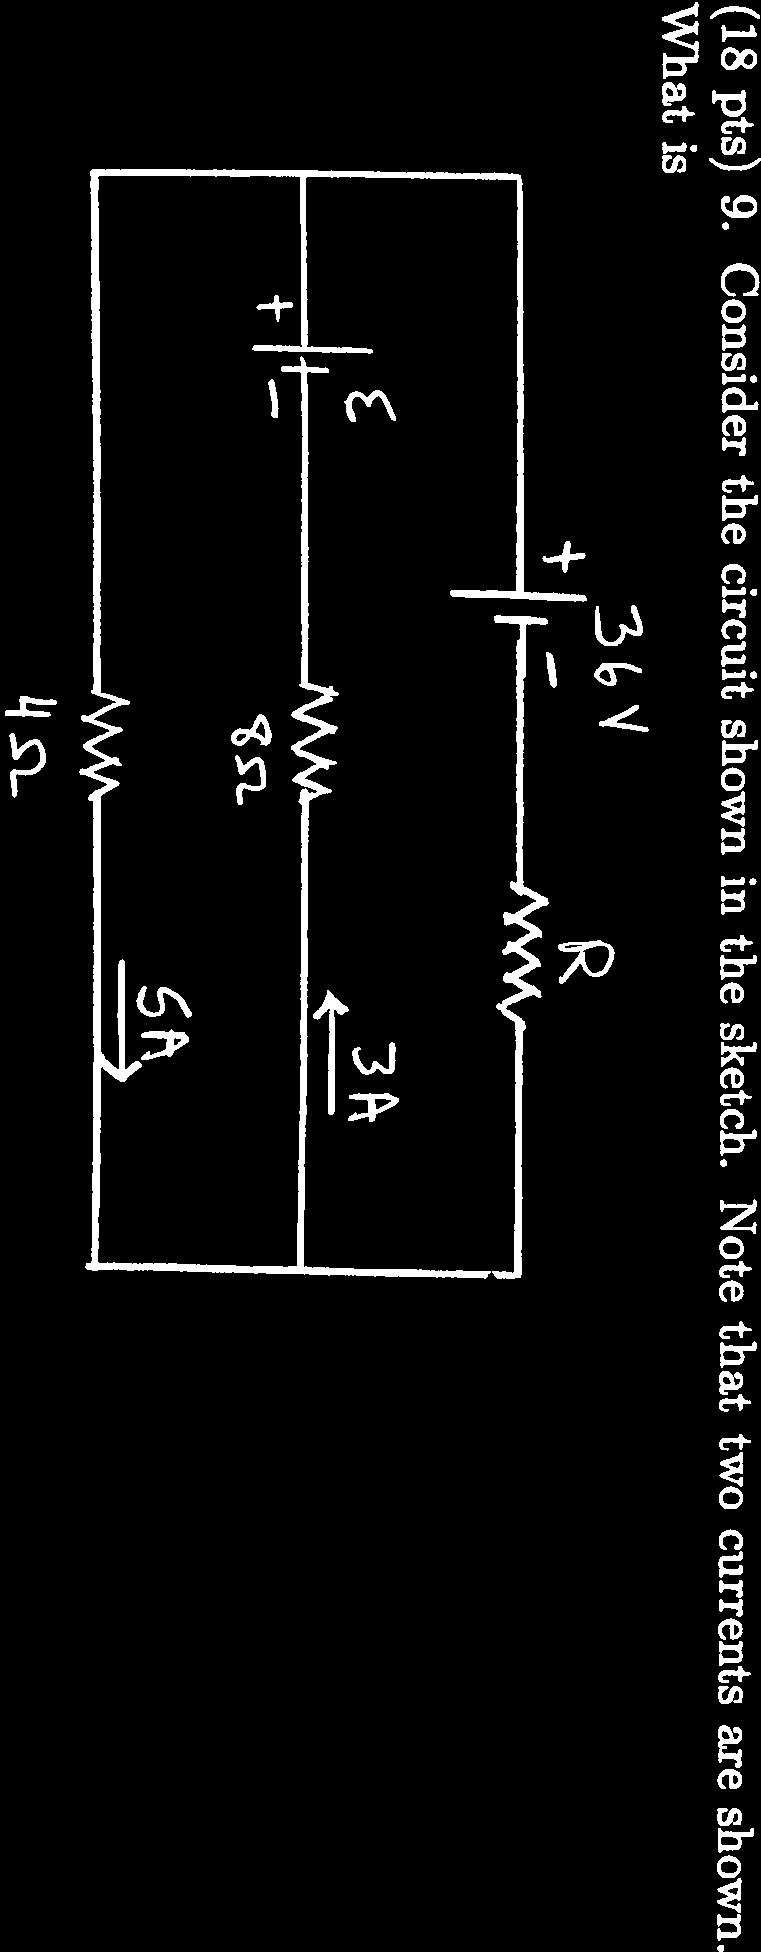 (18 pts) 9. Consider the circuit shown in the sketch.